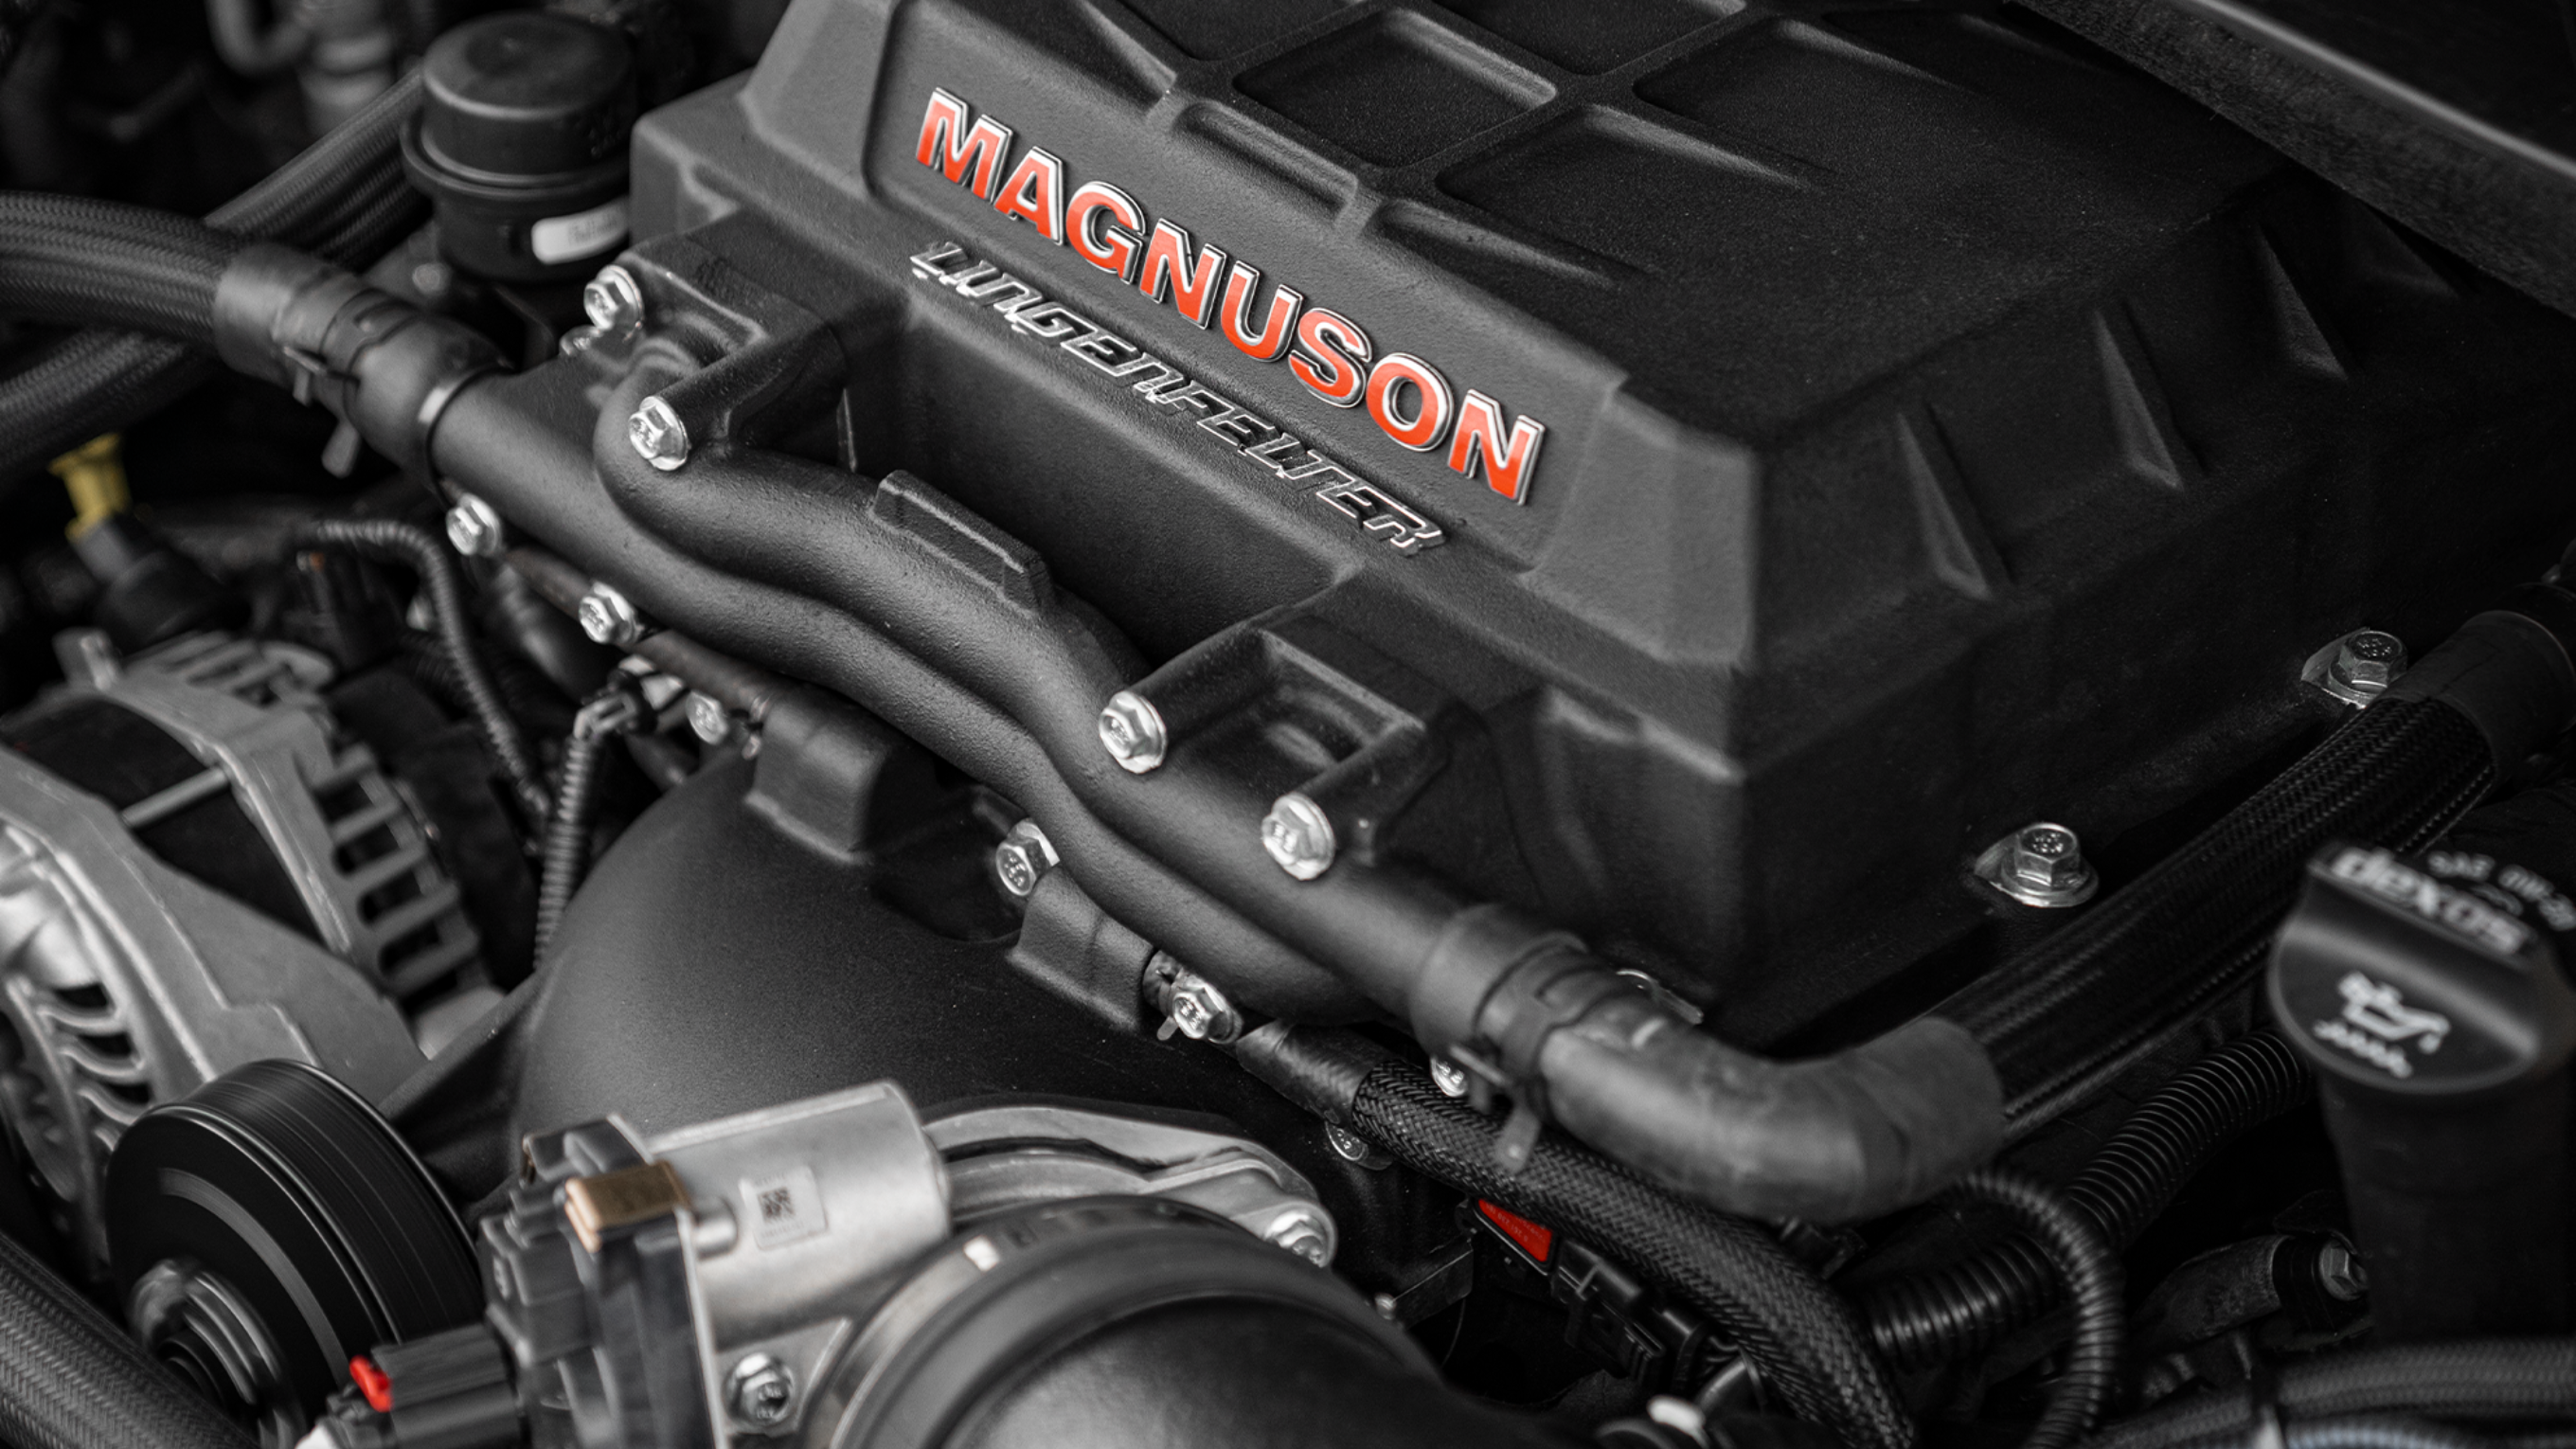 Lingenfelter And Magnuson’s SUV Supercharger Breakthrough